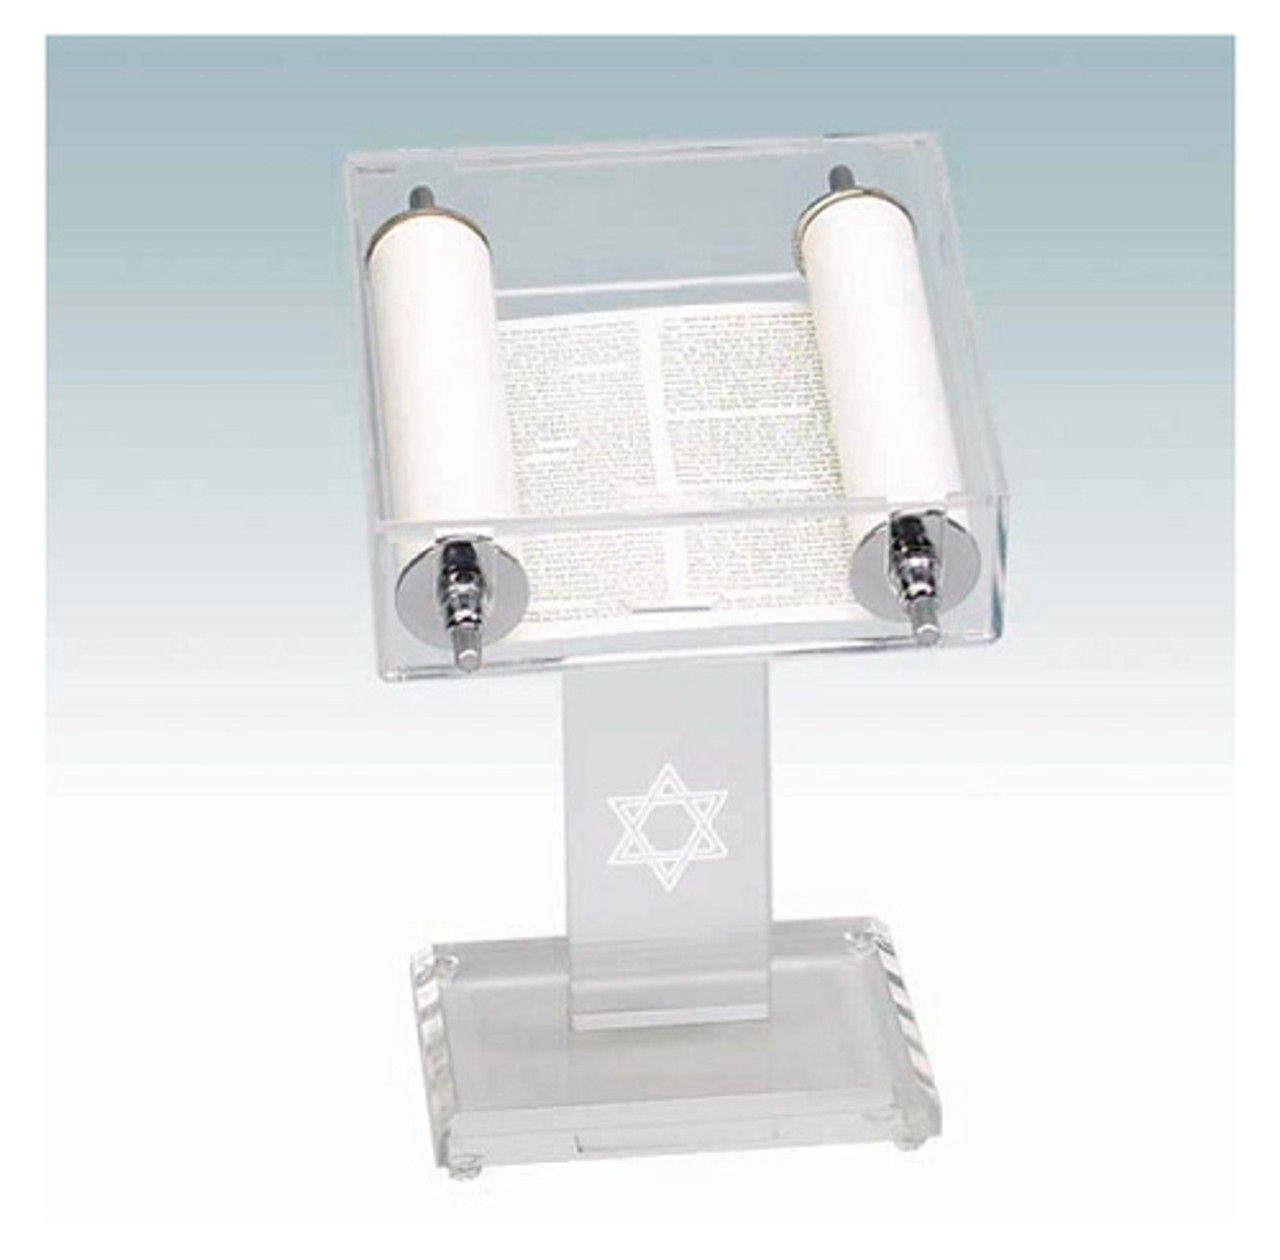 https://cdn11.bigcommerce.com/s-eglhh5/images/stencil/1280x1280/products/7687/20930/Complete-Torah-in-Acrylic-Display-Stand-act15__11679.1640538398.jpg?c=2